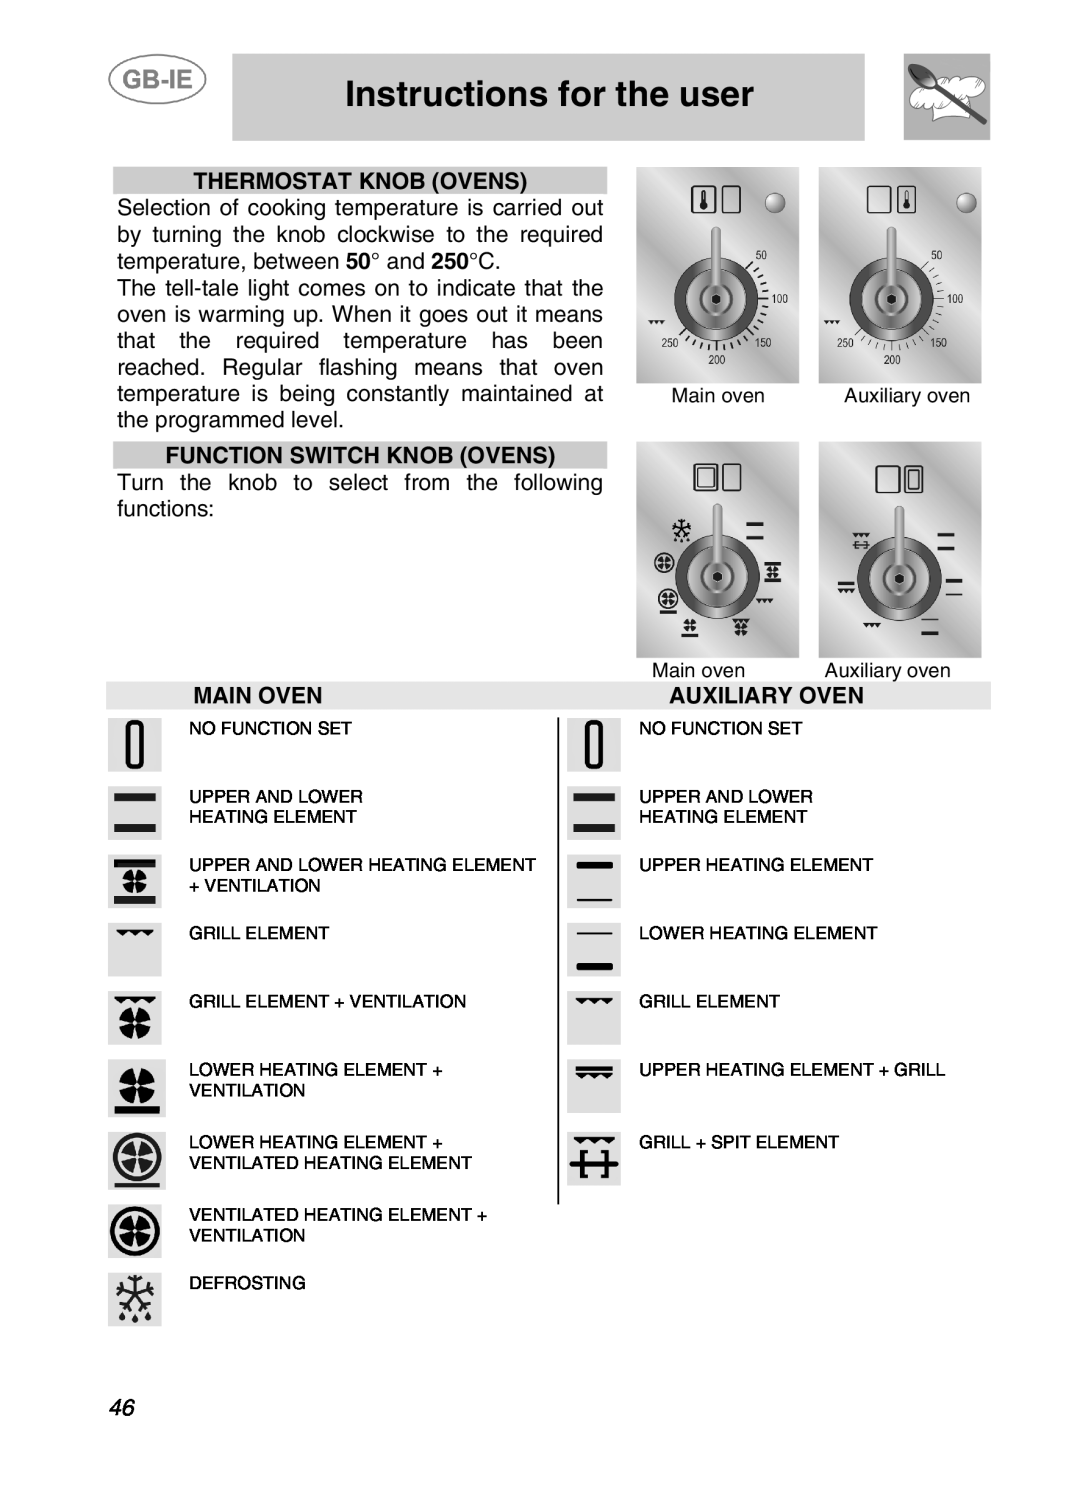 Smeg A2-2, A2-5 Instructions for the user, Thermostat Knob Ovens, Function Switch Knob Ovens, Main Oven, Auxiliary Oven 